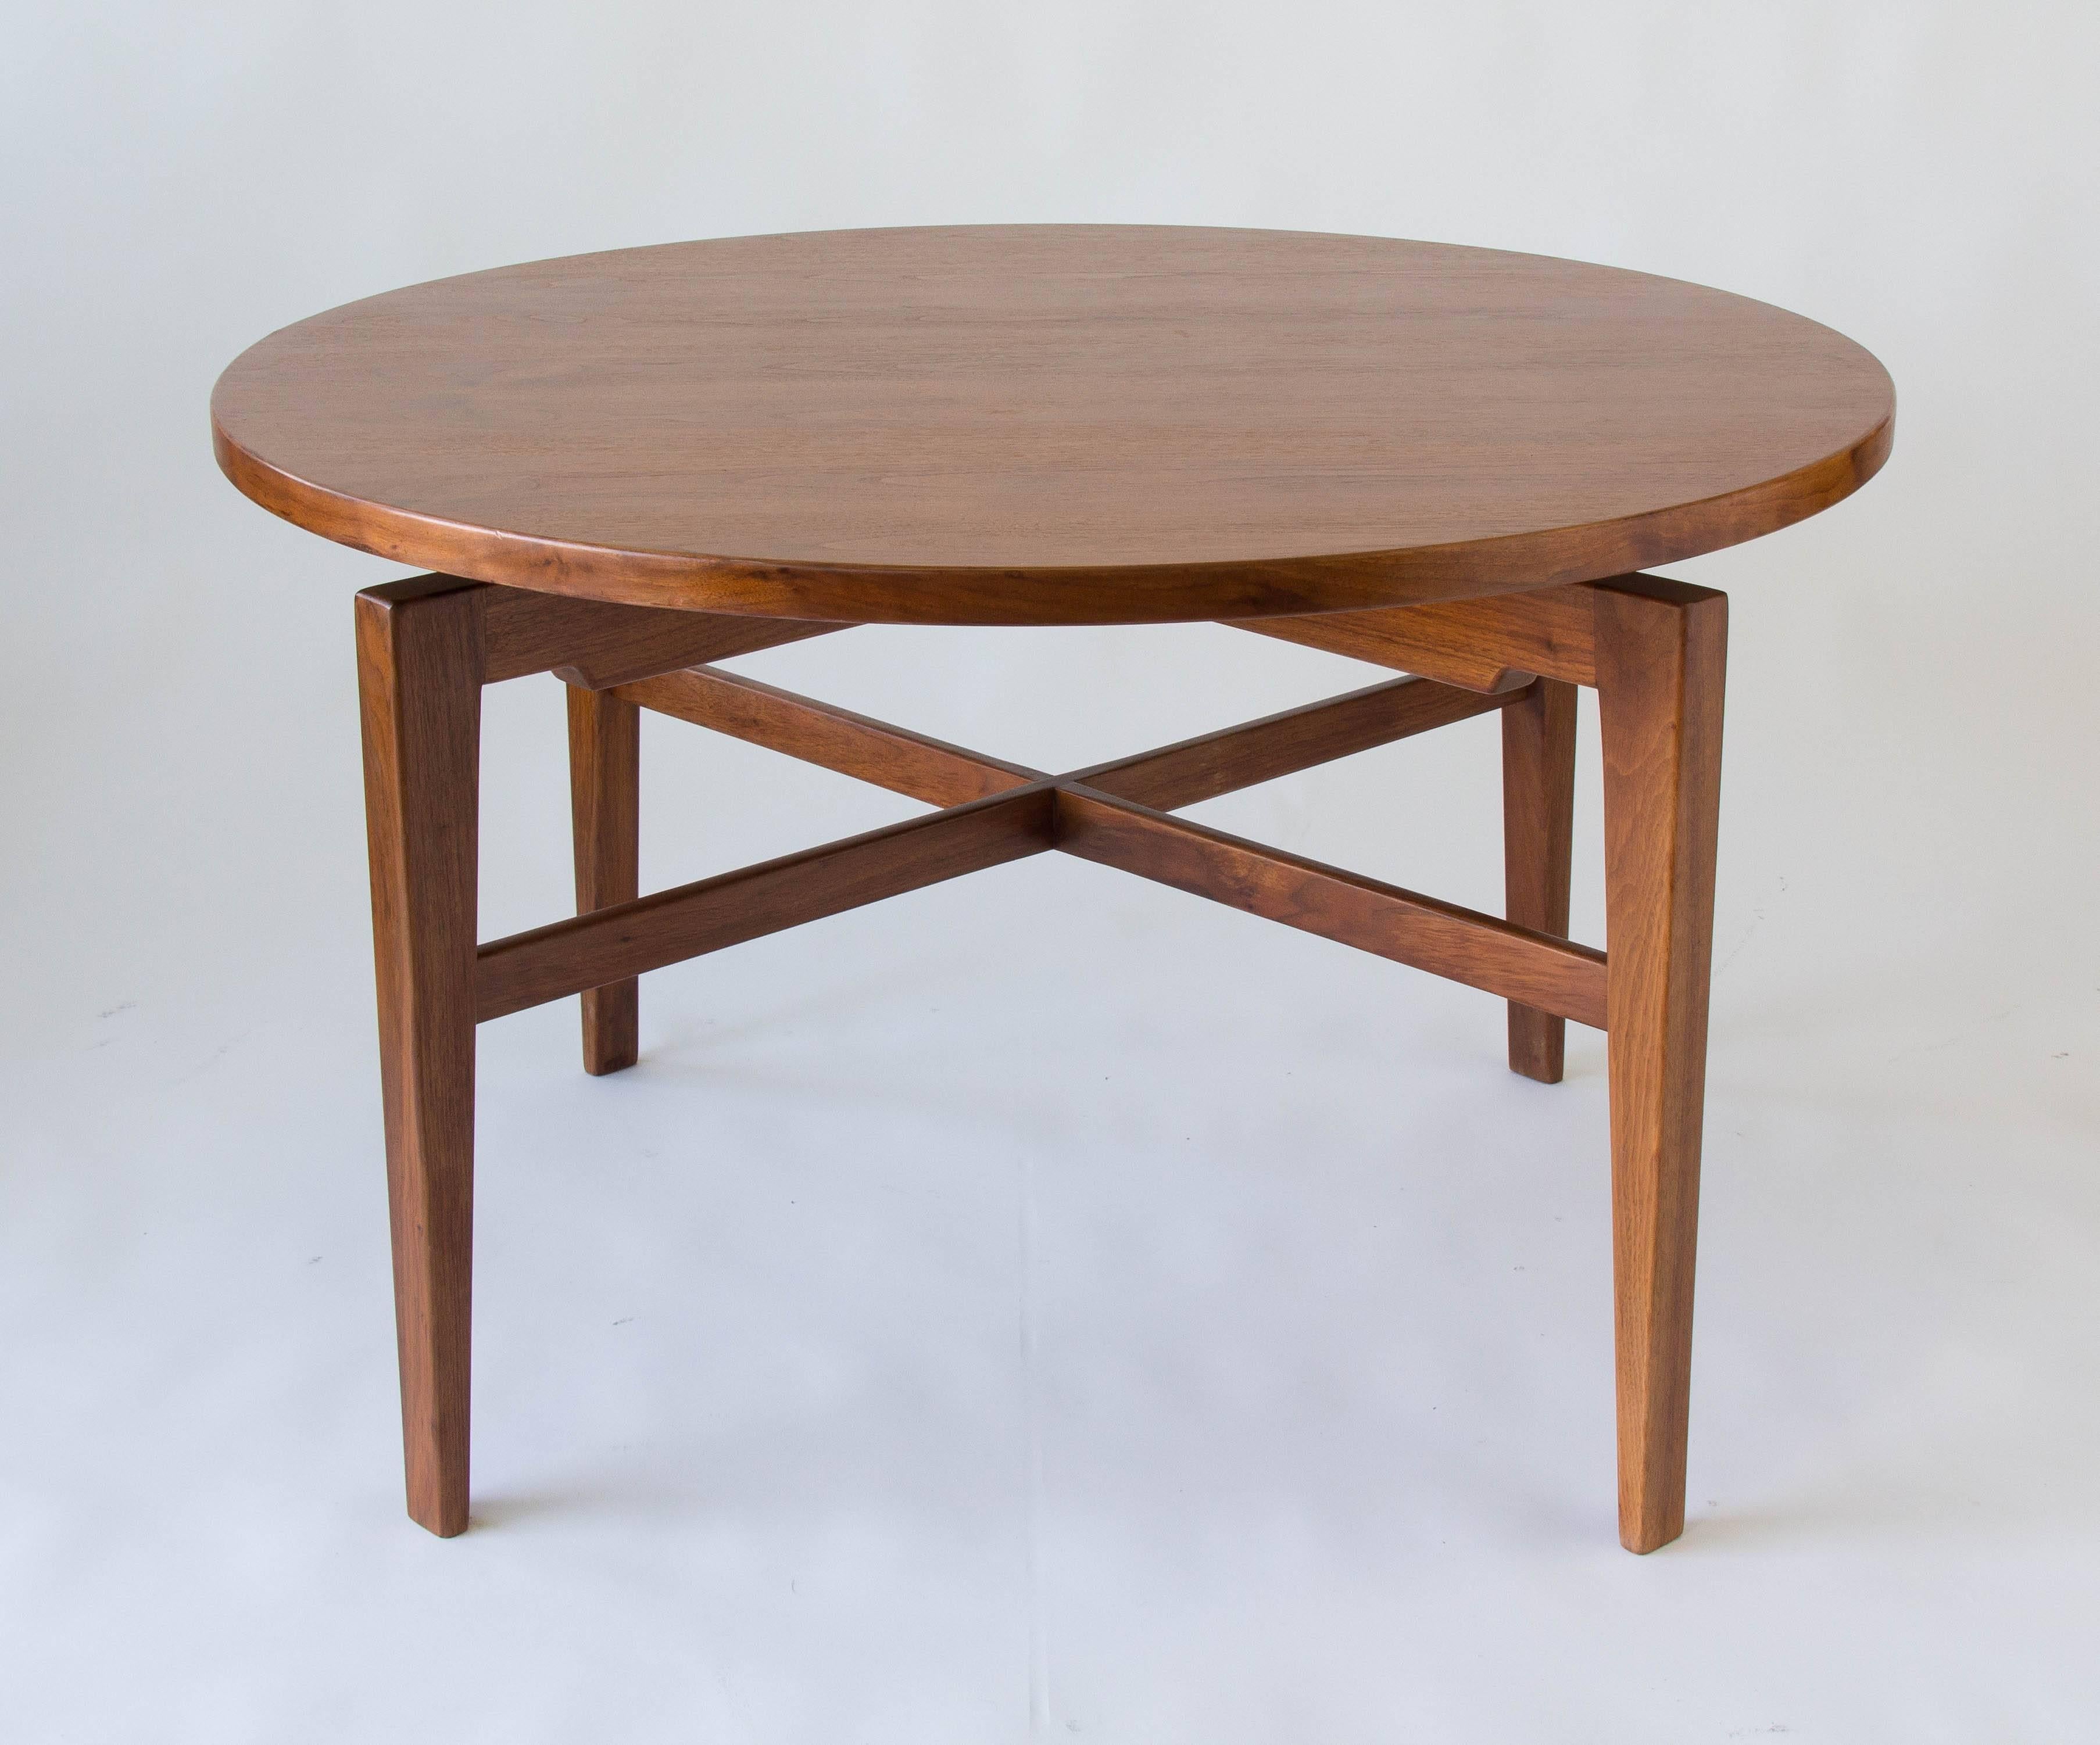 A walnut game or card table by Jens Risom that rotates on a central mechanism for a “Lazy Susan” effect. There is a hidden wheel underneath the table that can be adjusted to increase resistance and act as a brake. The four sculpted legs of the base